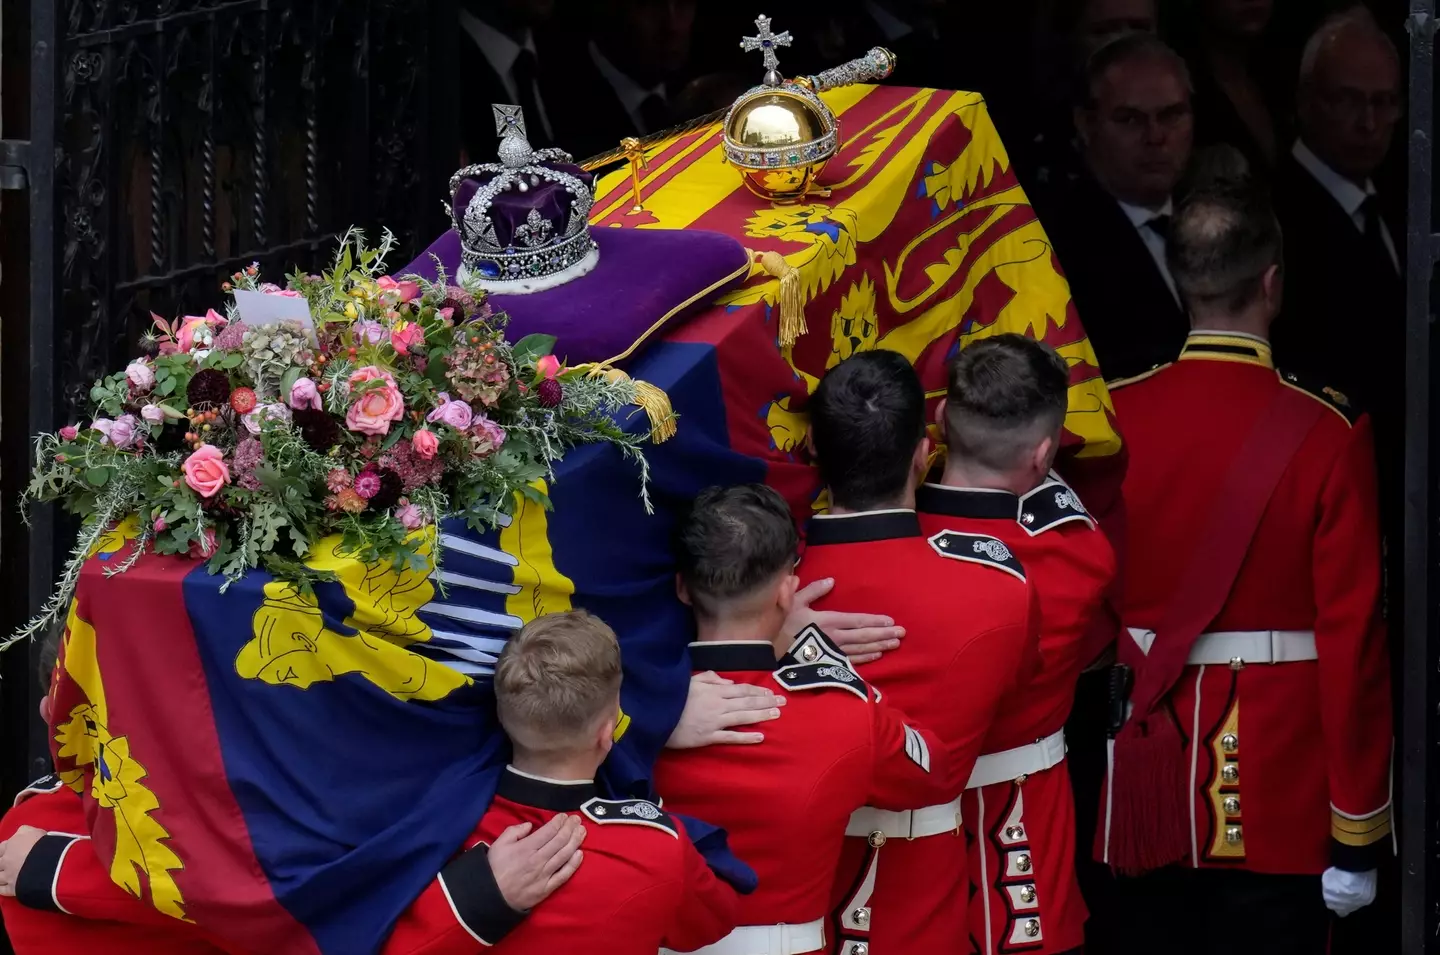 The coffin of Queen Elizabeth II is carried into Saint George's chapel for her funeral at Windsor castle.